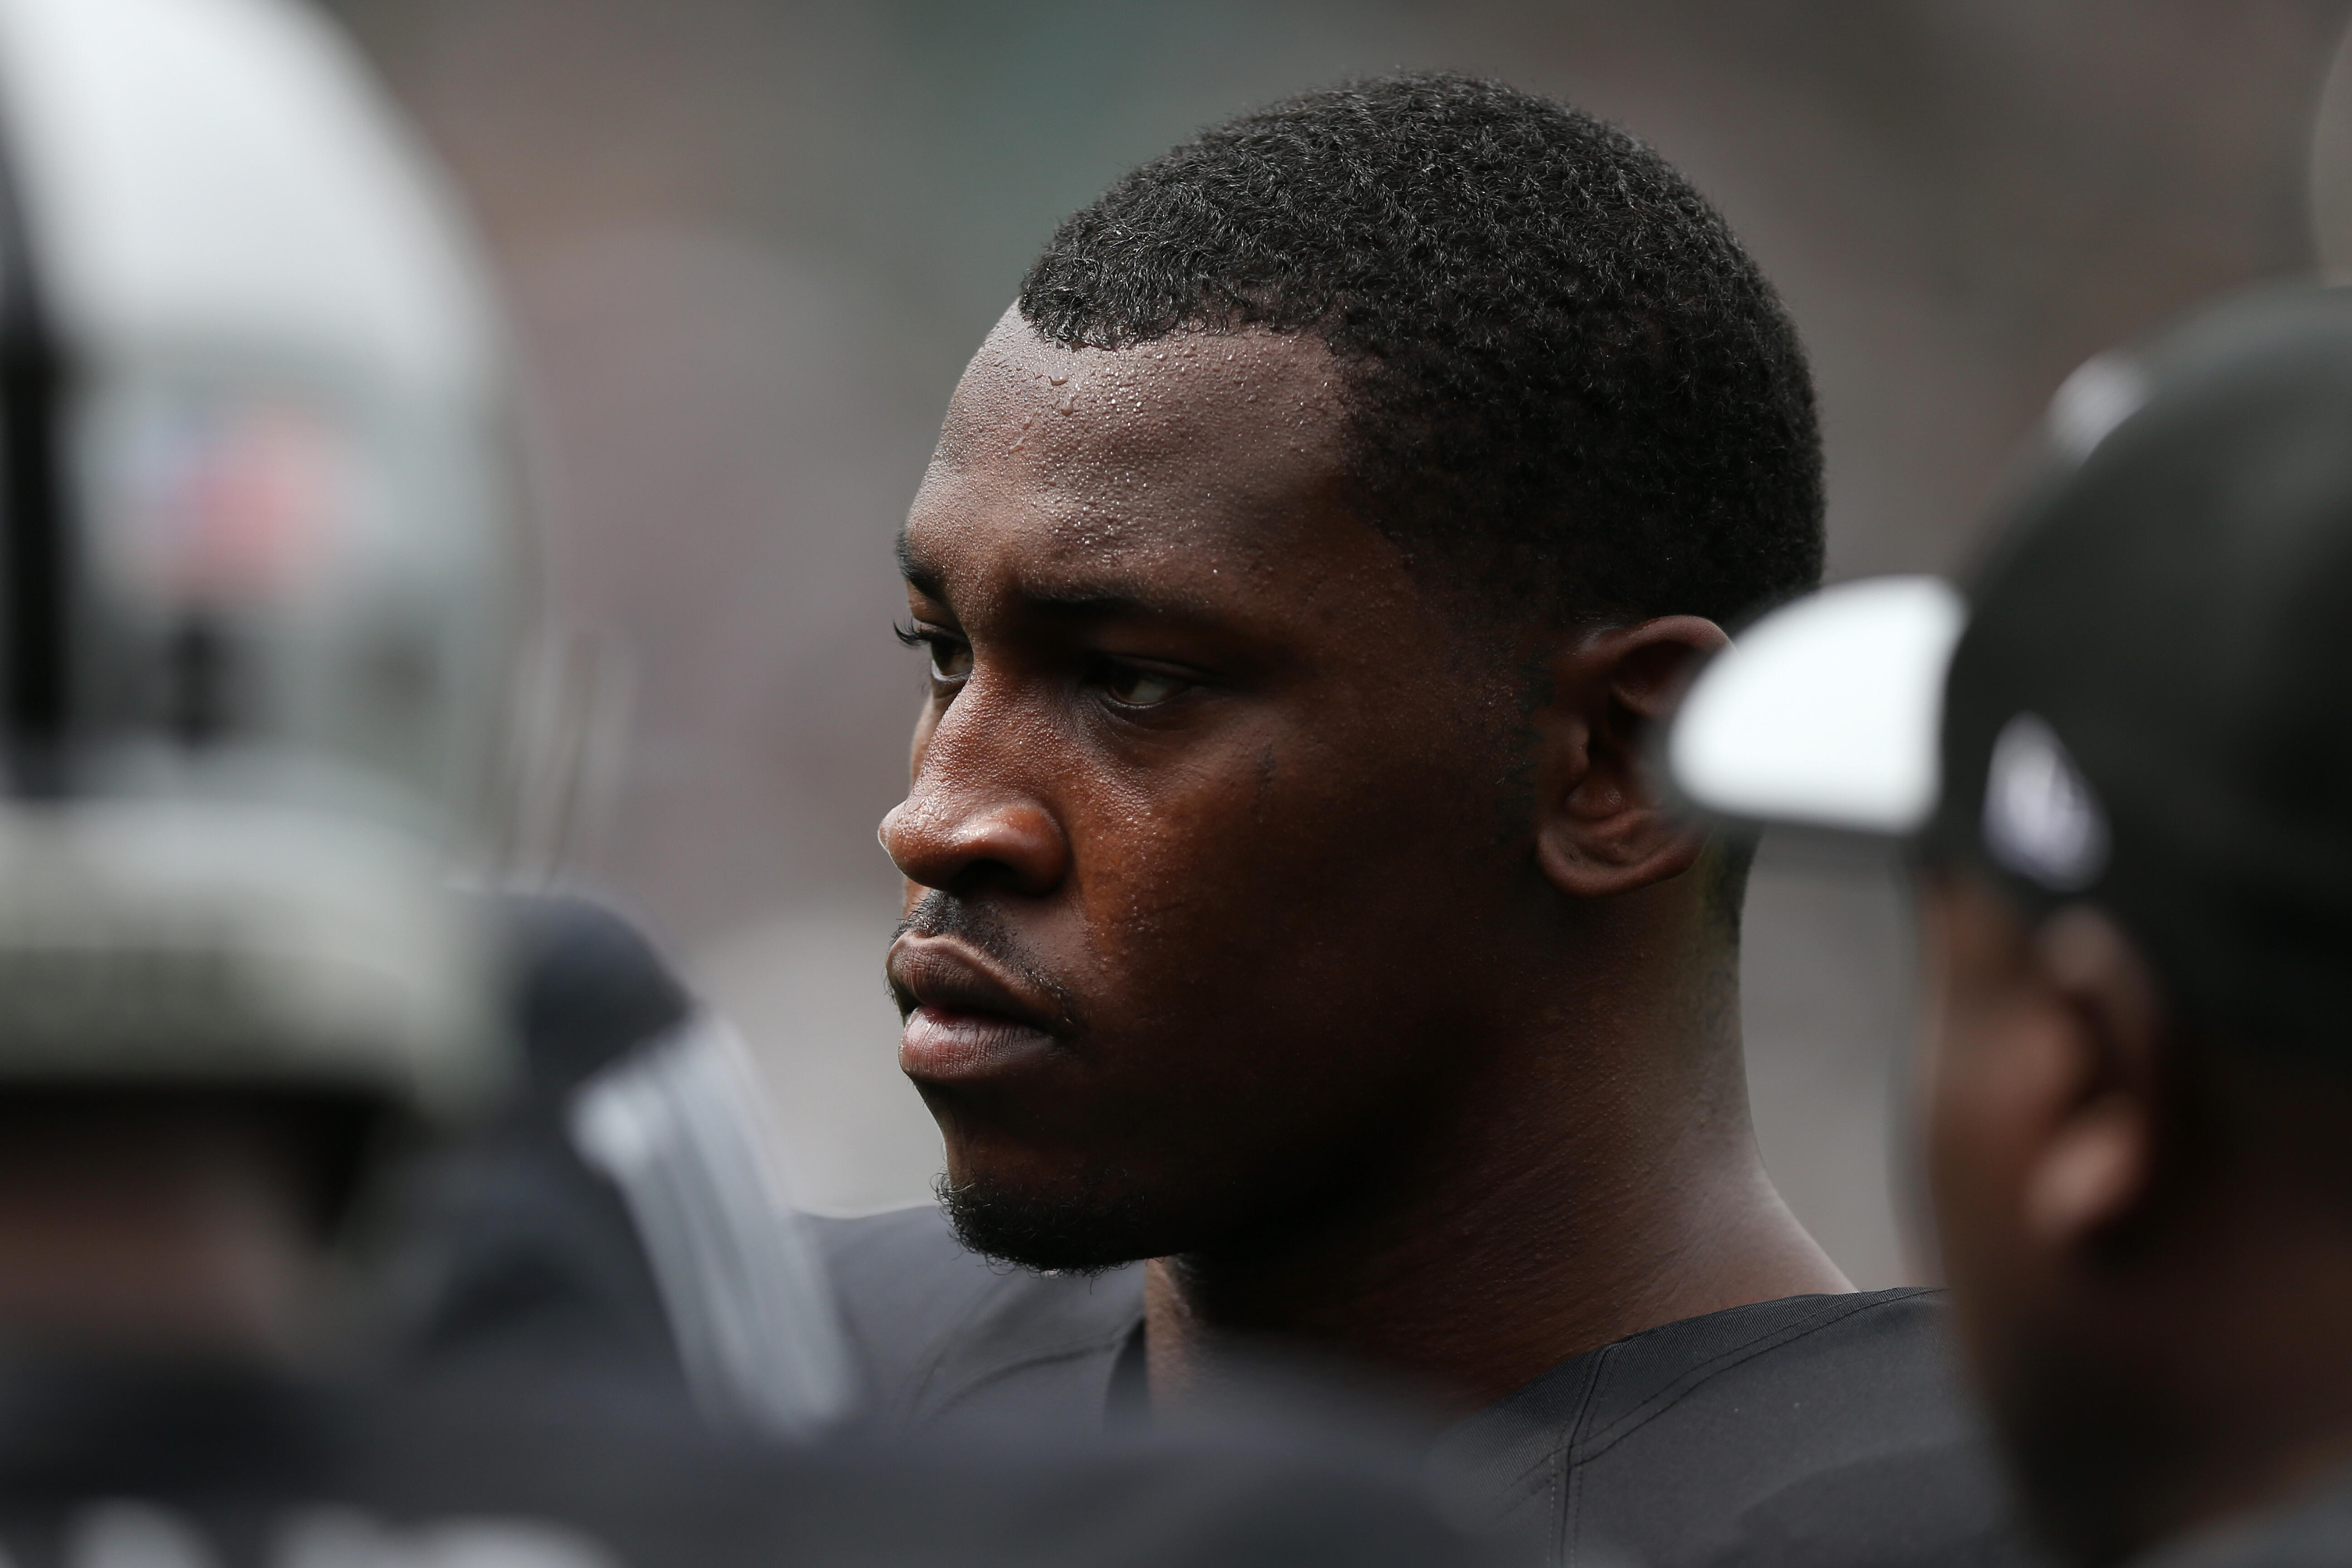 OAKLAND, CA - SEPTEMBER 13:  Aldon Smith #99 of the Oakland Raiders warms up prior to playing the Cincinnati Bengals in their NFL season opener game at O.co Coliseum on September 13, 2015 in Oakland, California.  (Photo by Ezra Shaw/Getty Images)